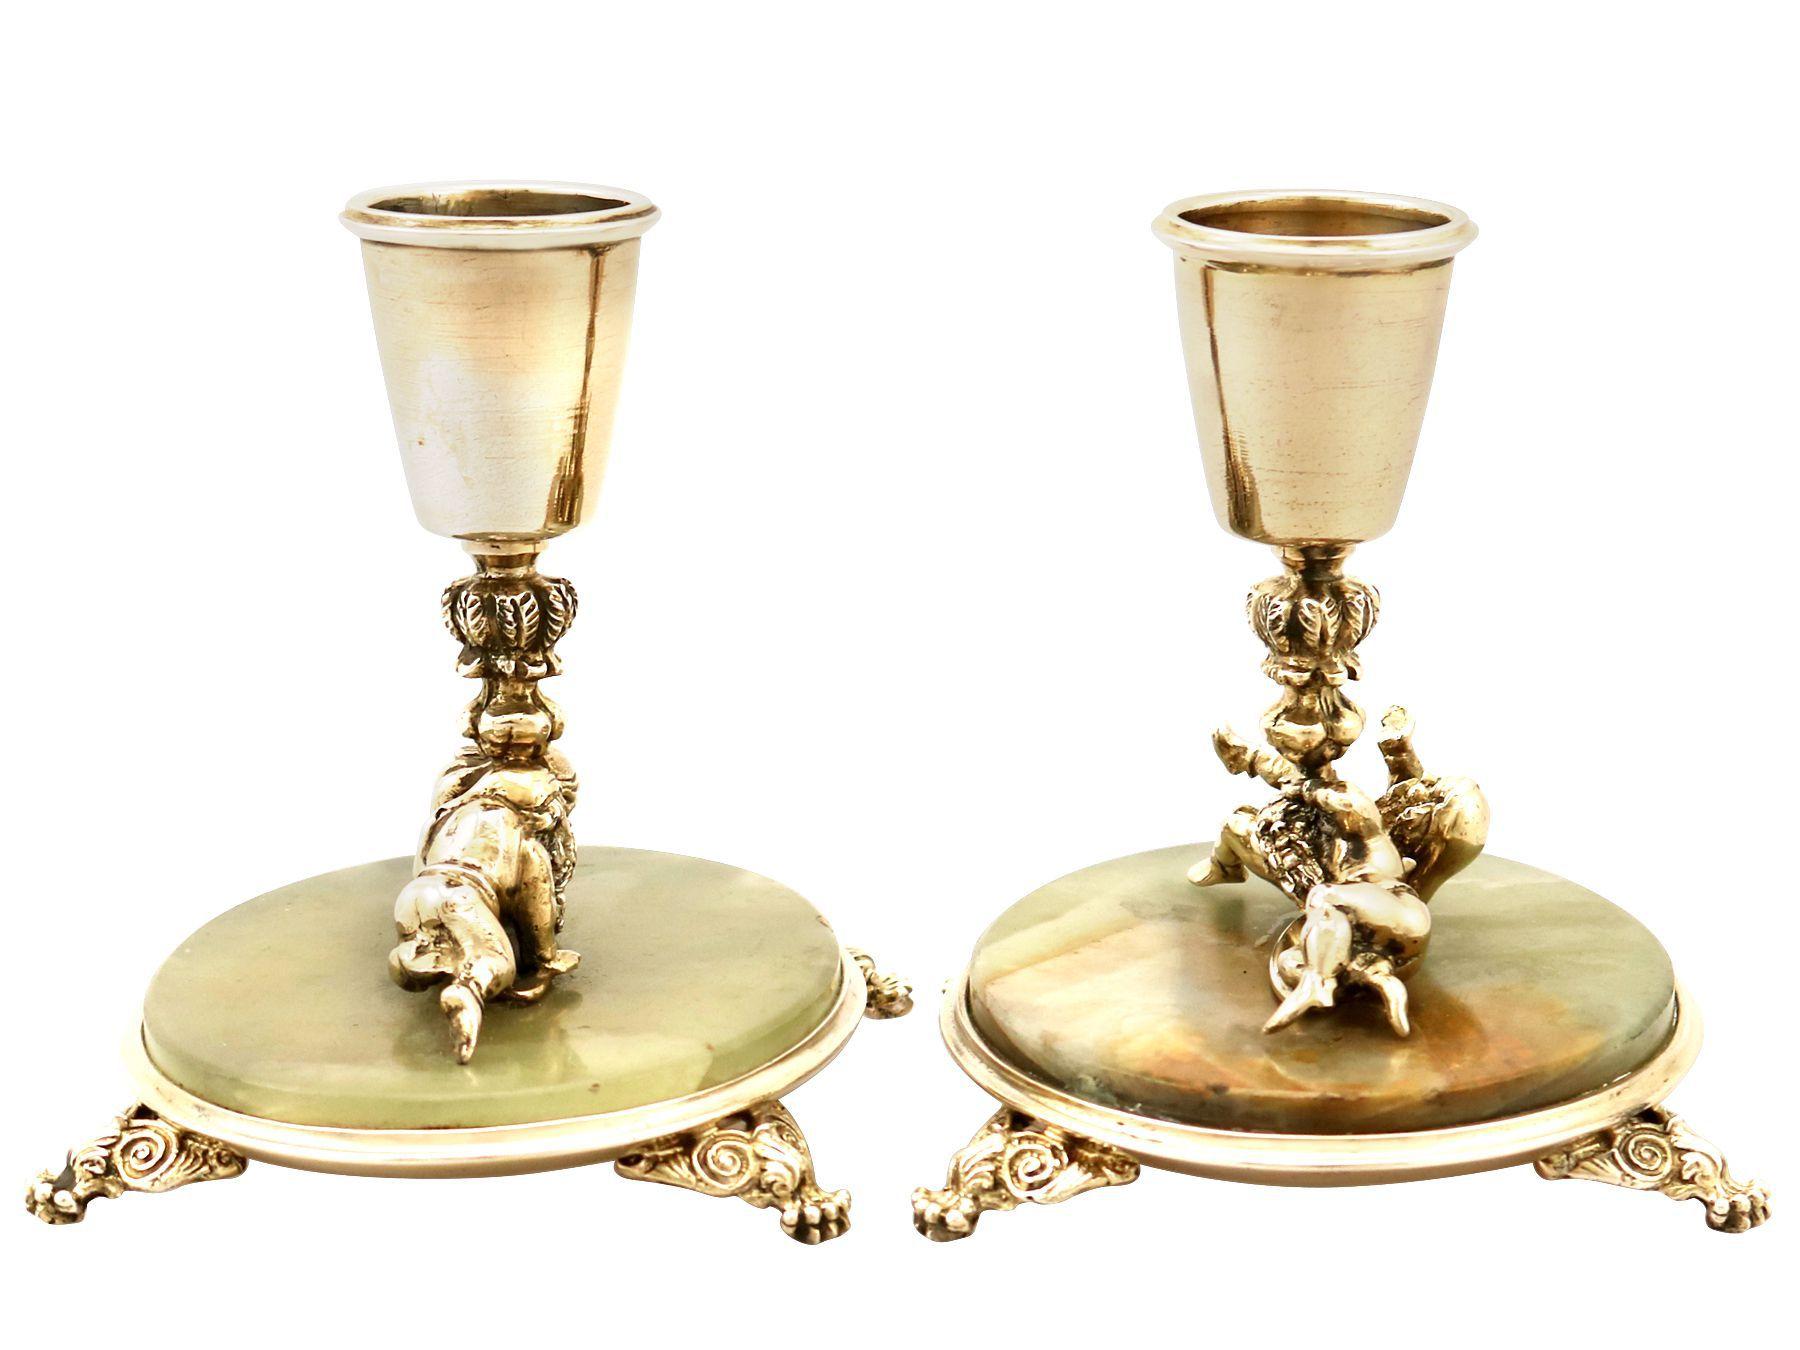 Antique Italian Silver Gilt and Marble Candlesticks In Excellent Condition For Sale In Jesmond, Newcastle Upon Tyne